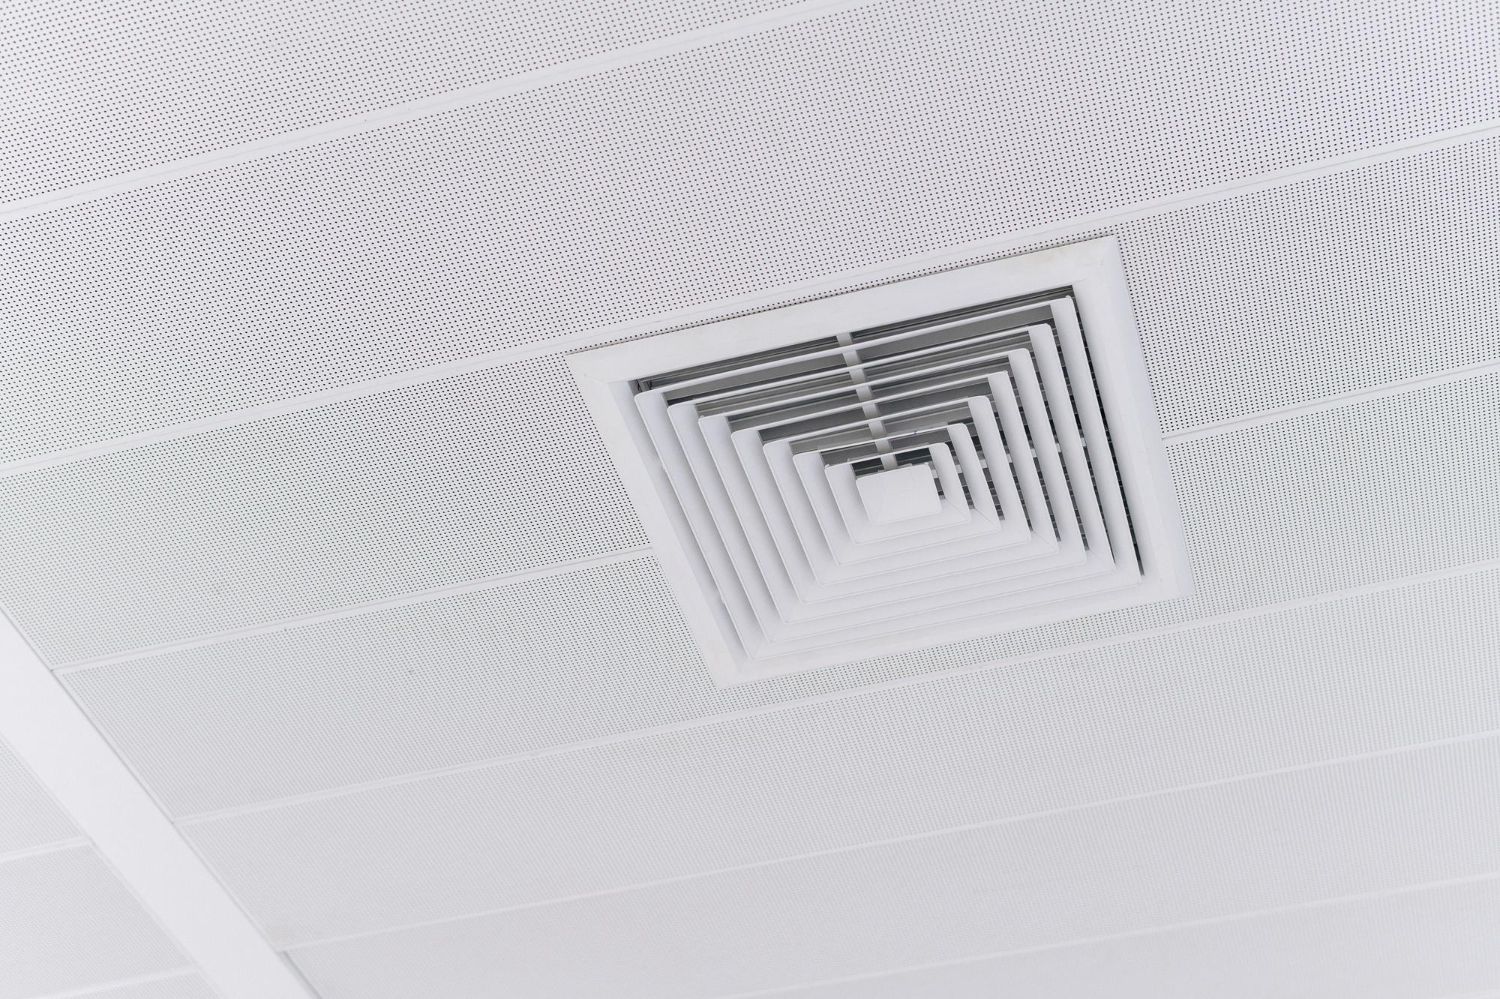 A white square ceiling air vent set into a white ceiling.